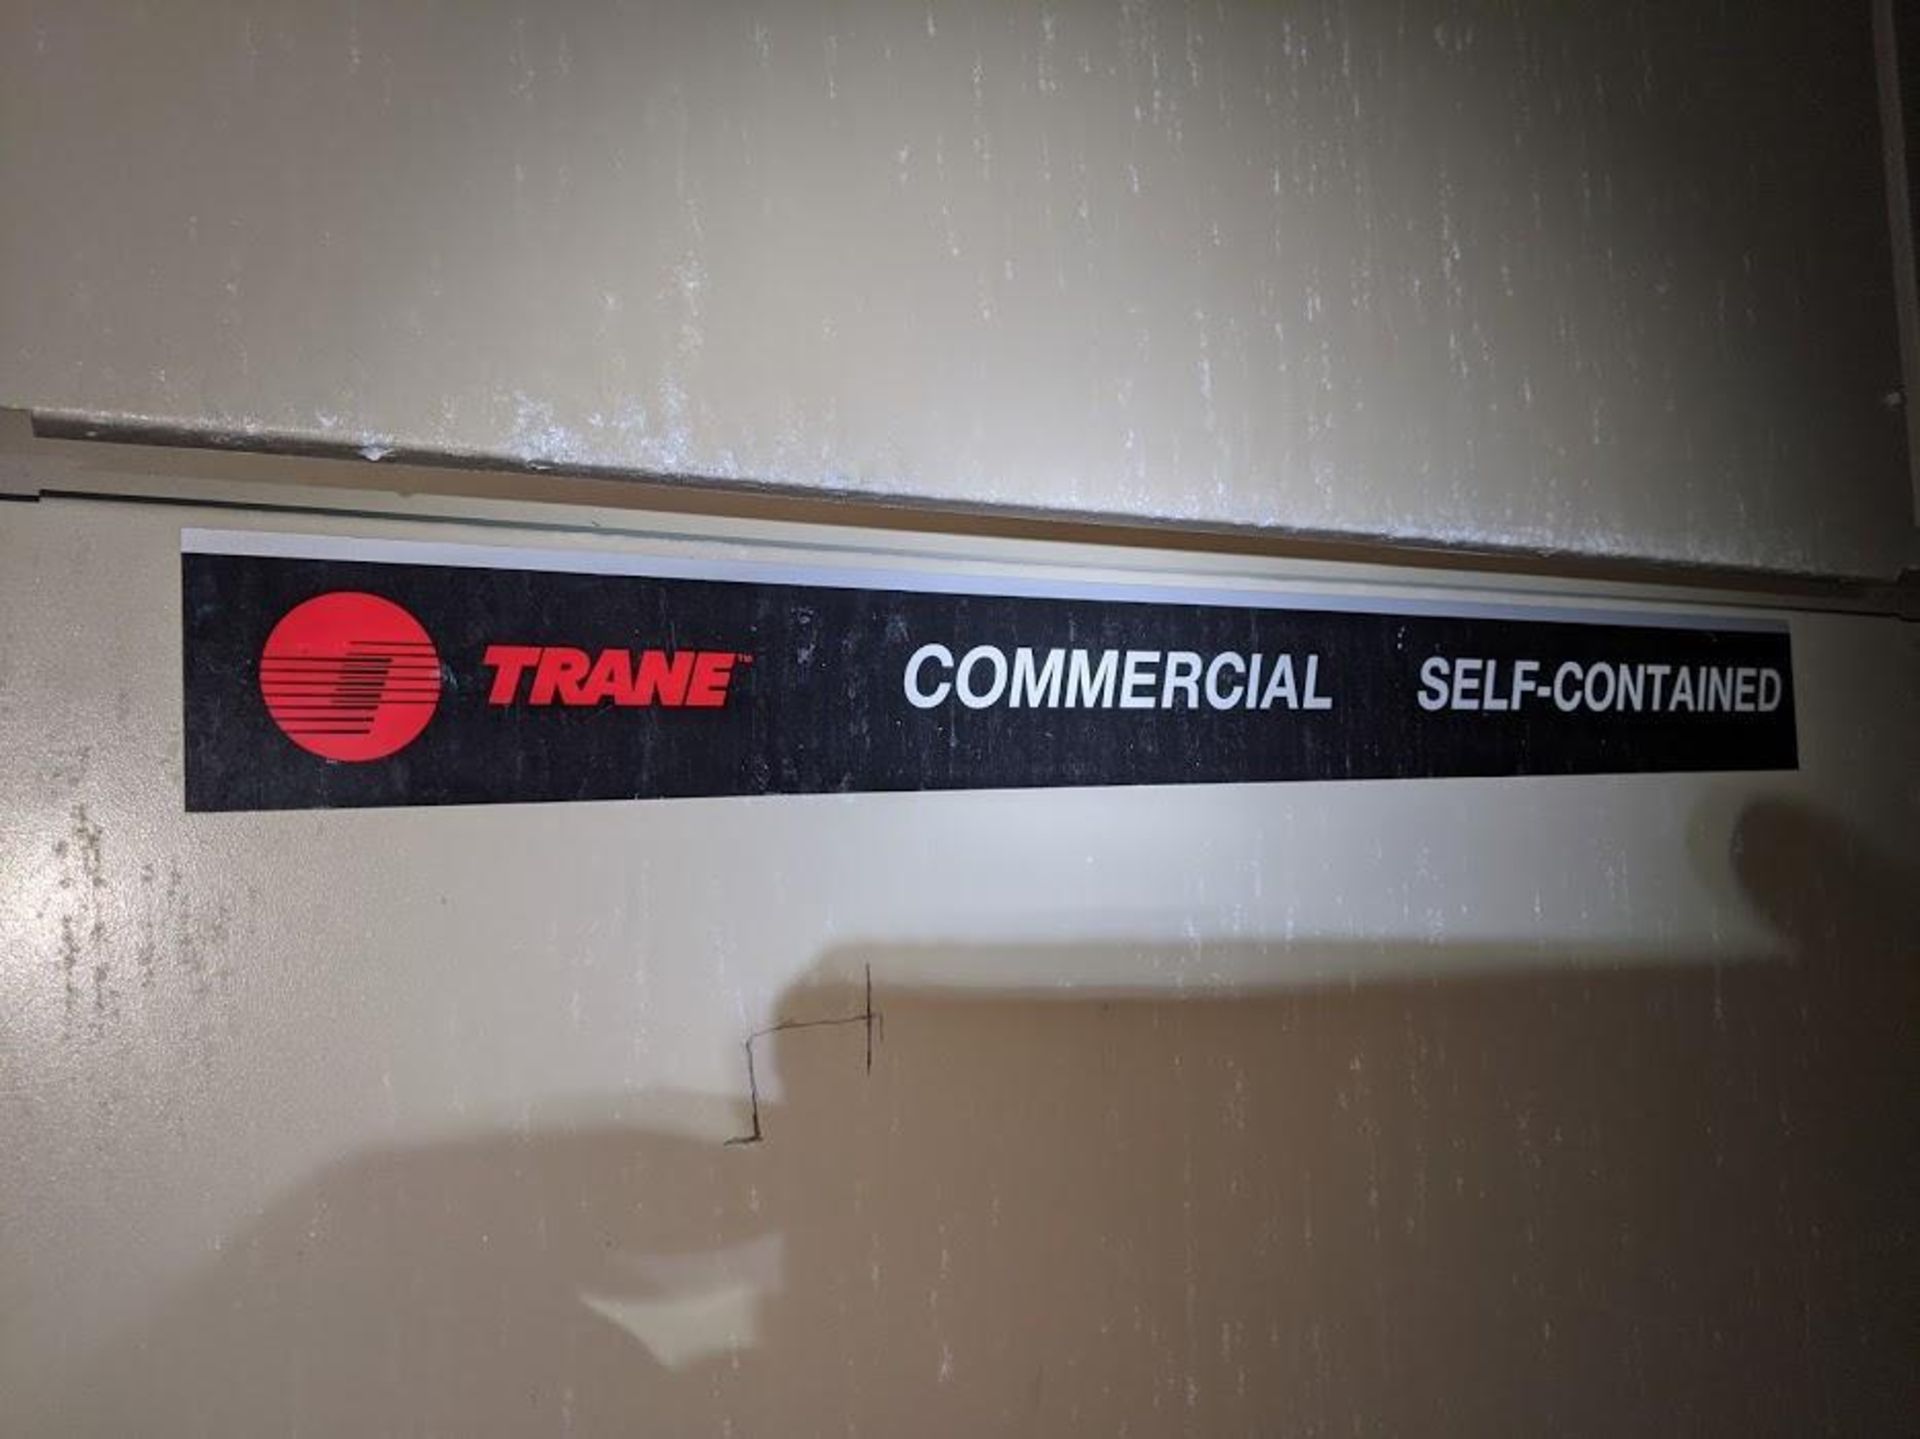 TRANE SELF CONTAINED COMMERCIAL 10 TON AC UNIT SCWC02540L031101151000202BAR0BJ - Image 3 of 3